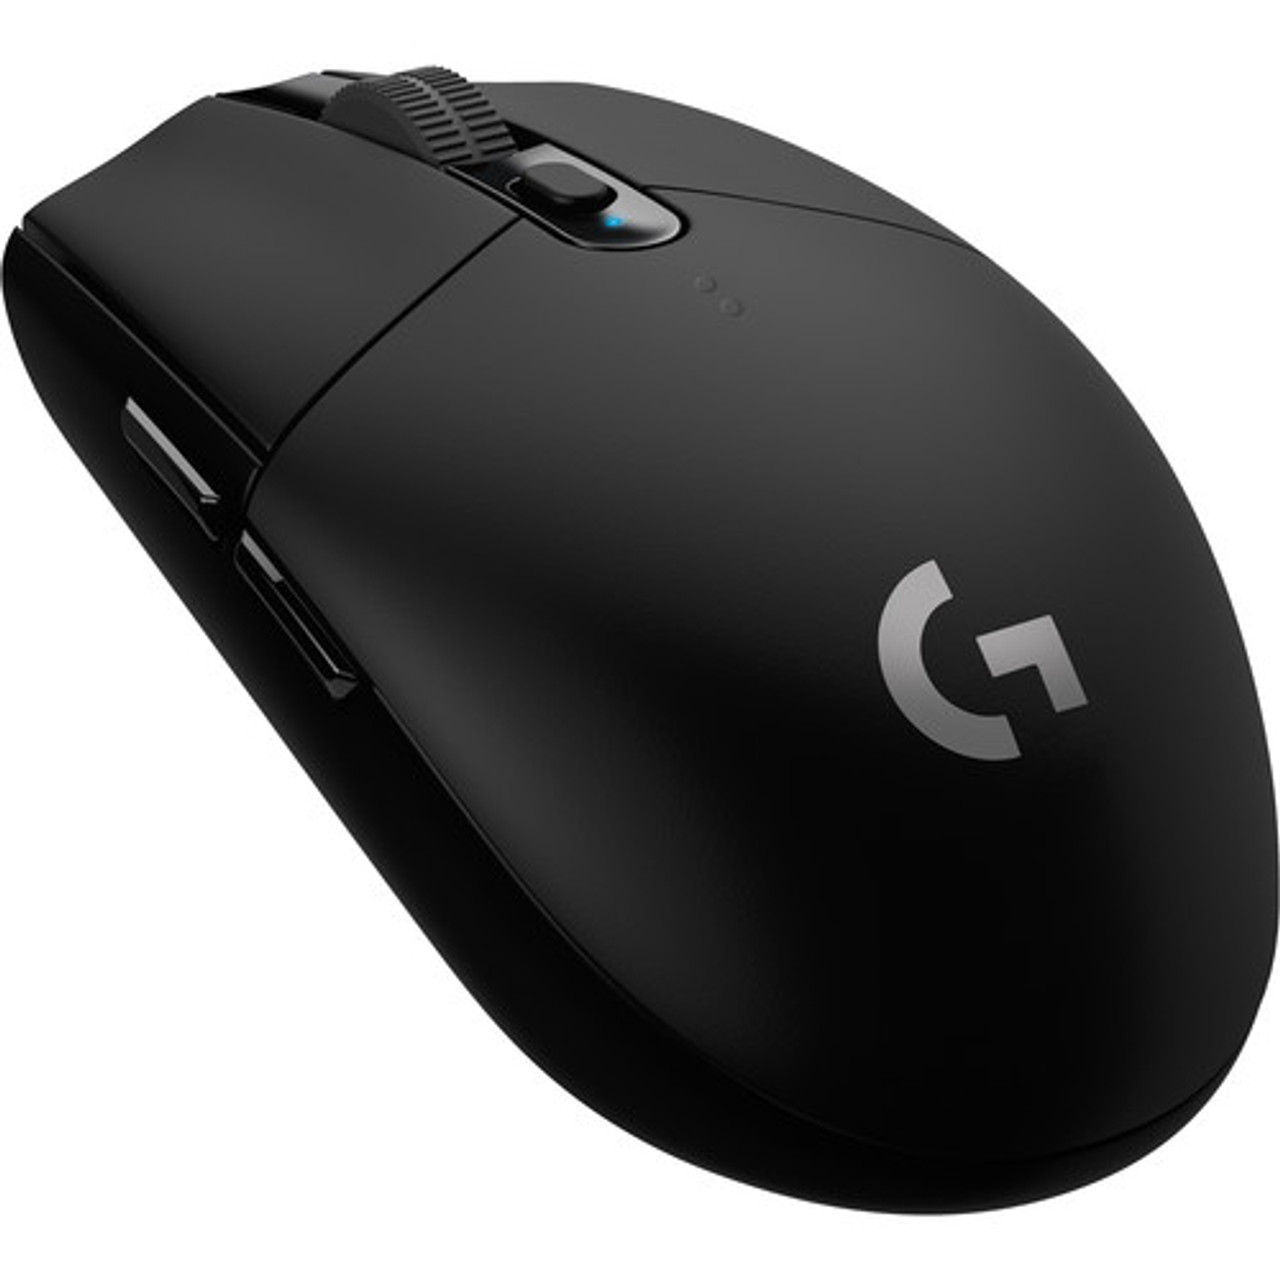 Logitech G305 Lightspeed Wireless Gaming Mouse with 6-Programmable Button -  Black